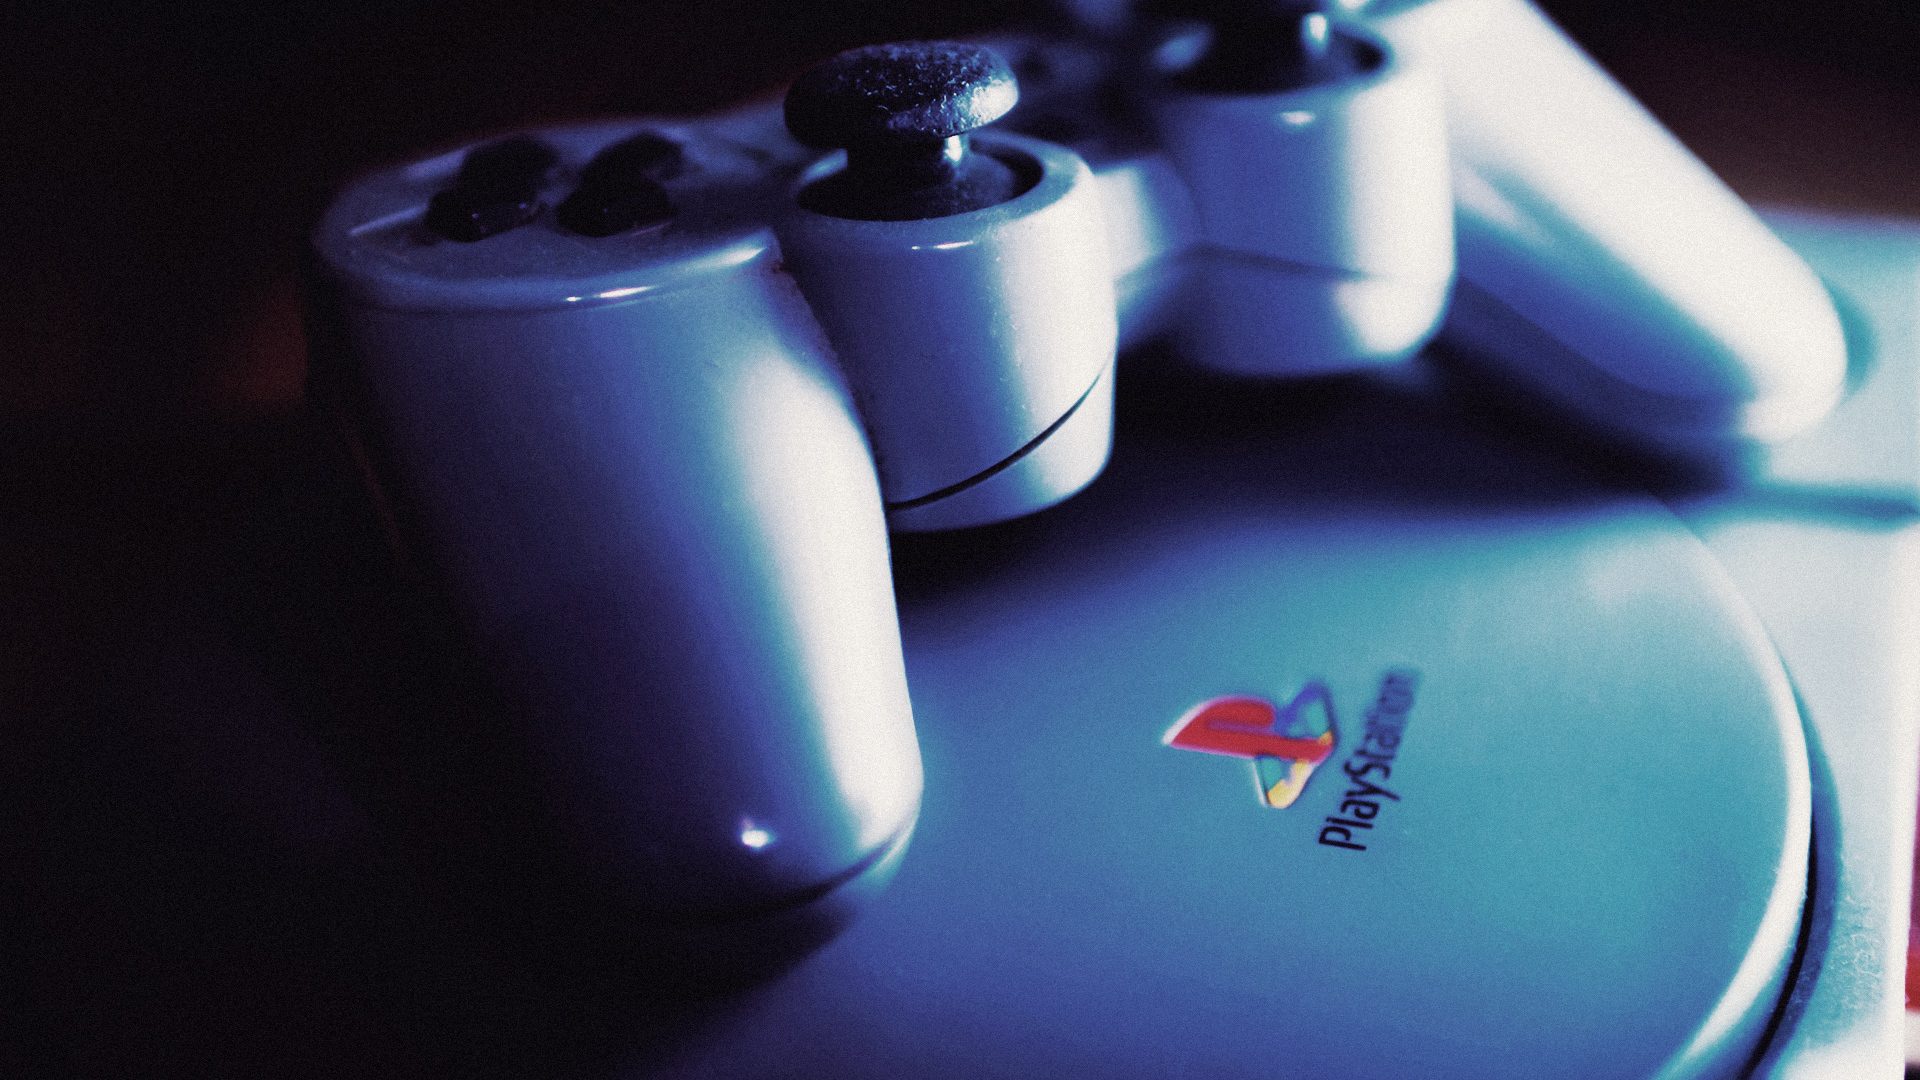 Up Close And Personal Wallpaper Of The Sony Playstation - Playstation 1 Wallpaper Hd , HD Wallpaper & Backgrounds